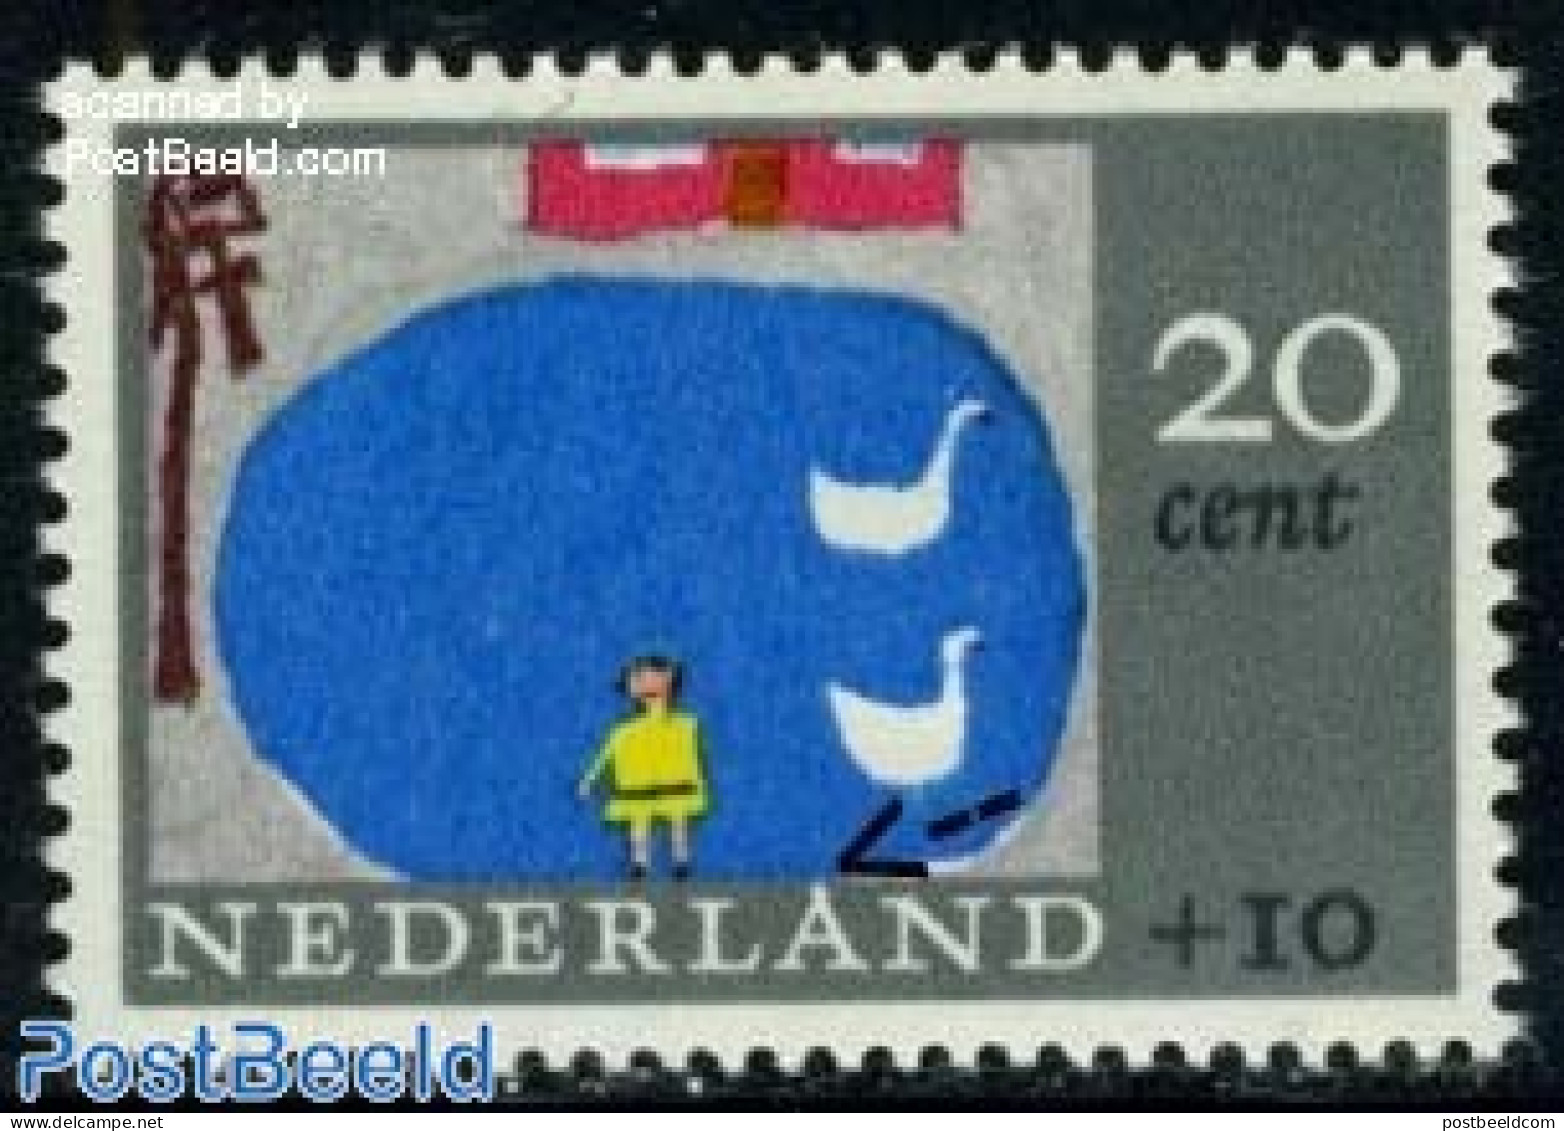 Netherlands 1965 Plate Flaw 20+10c, Longer A In NEDERLAND, Mint NH, Various - Errors, Misprints, Plate Flaws - Childre.. - Unused Stamps